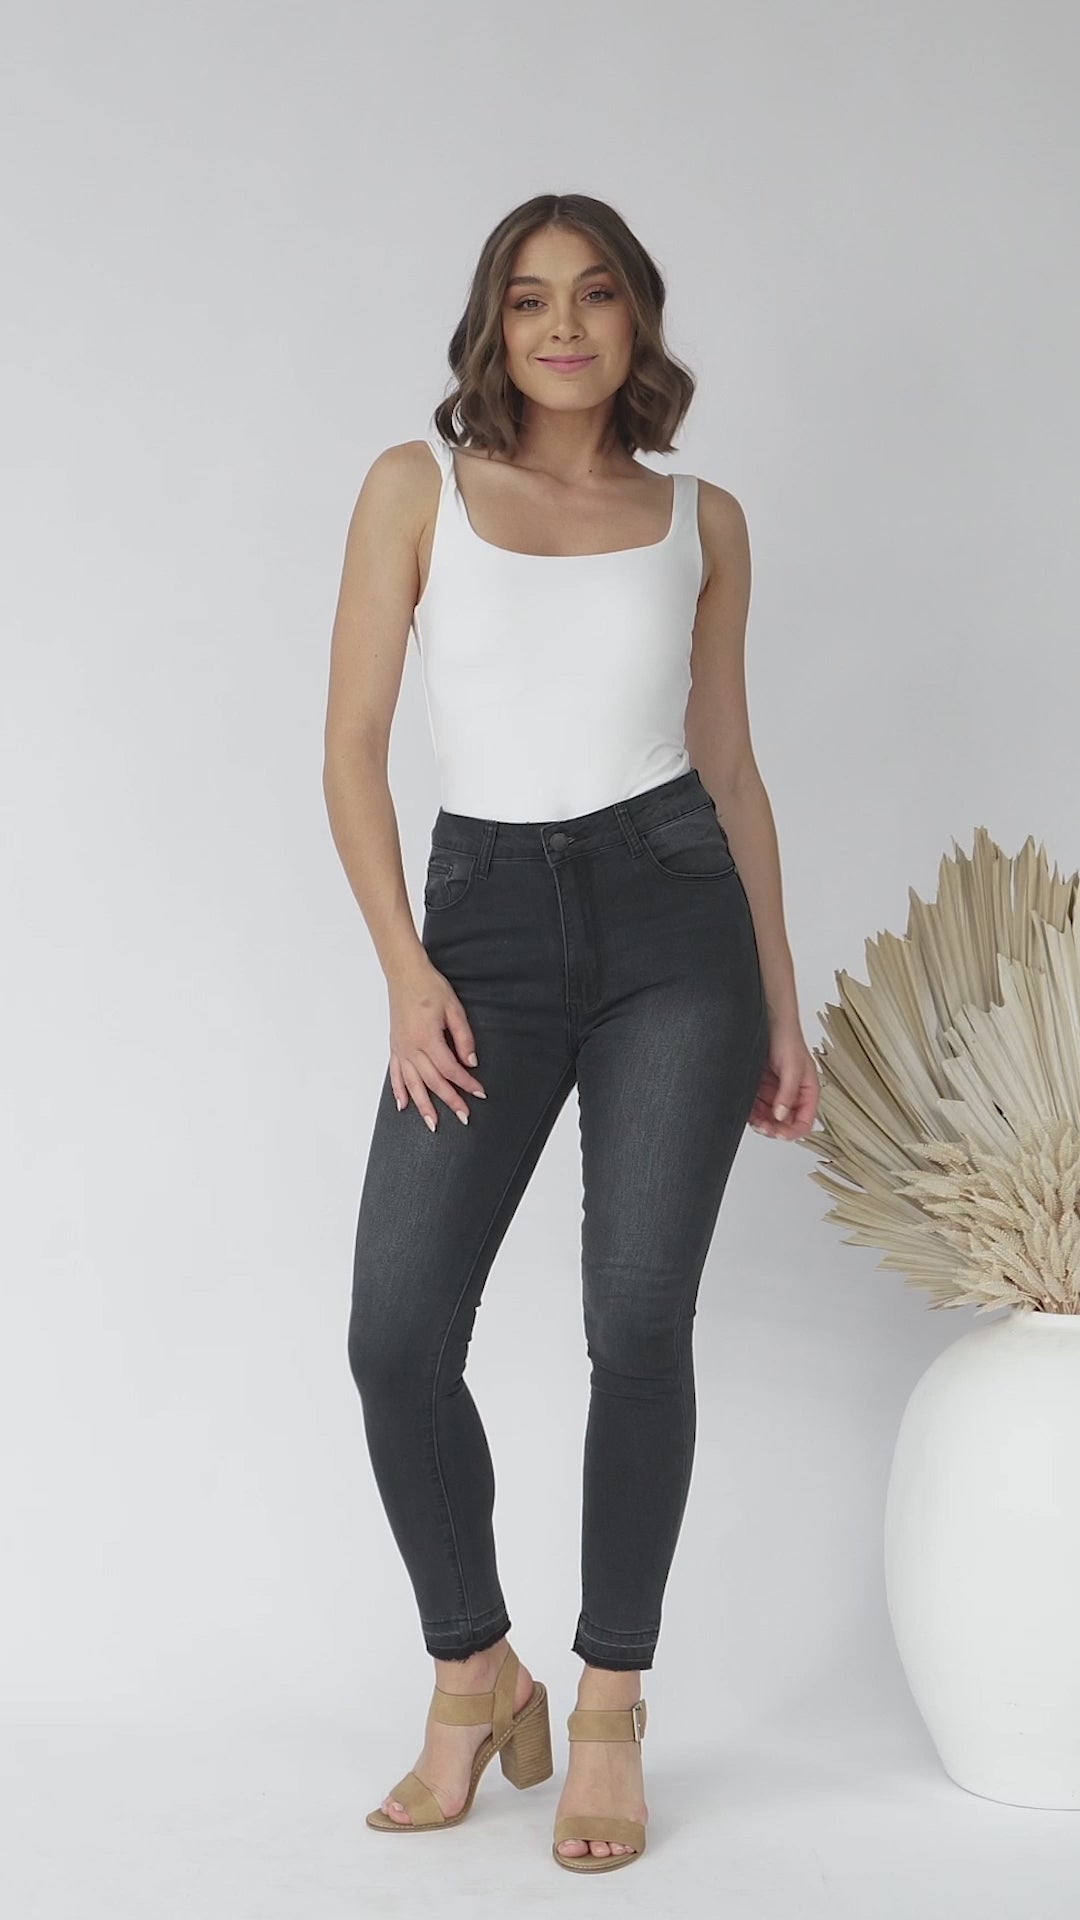 Sherrie Jeans - Skinny High Waisted Jeans in Charcoal